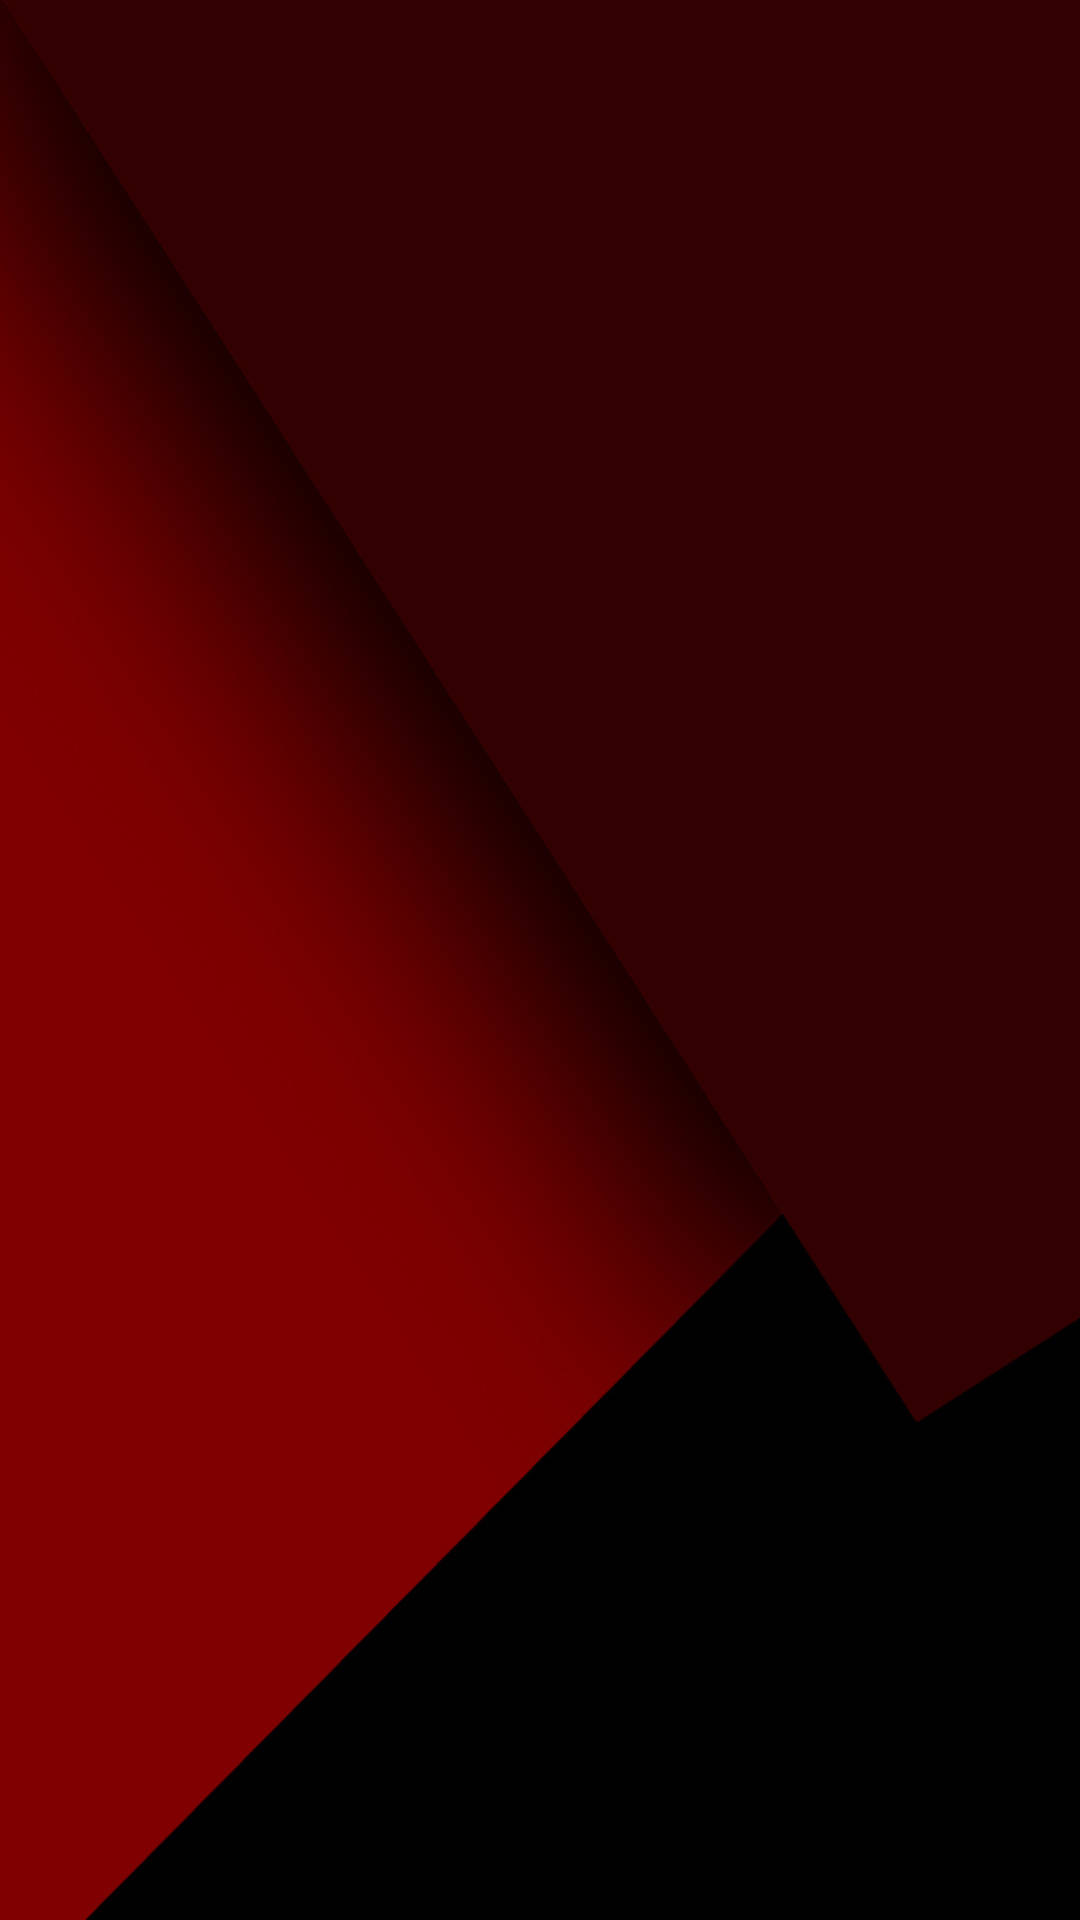 Be Bold with Red And Black Iphone Wallpaper